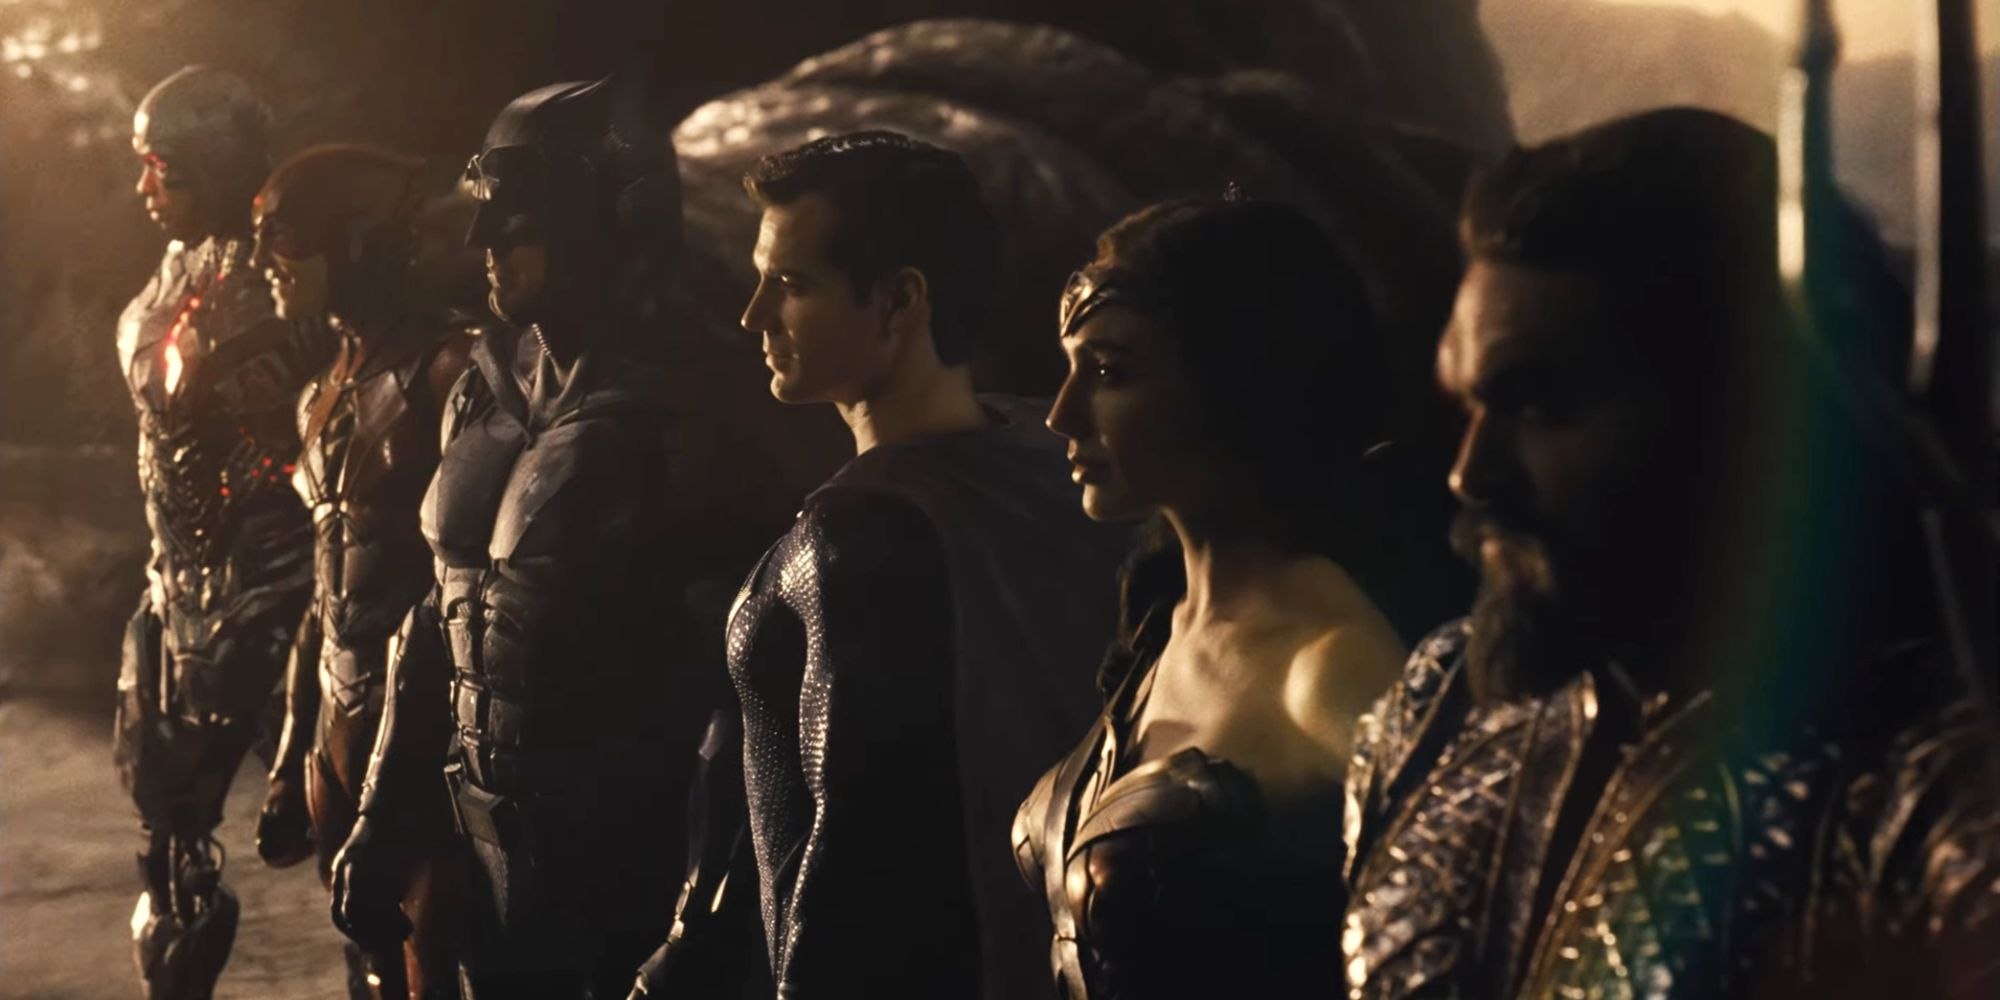 The league stand together in the sunshine in Zack Snyder's Justice League (2021)